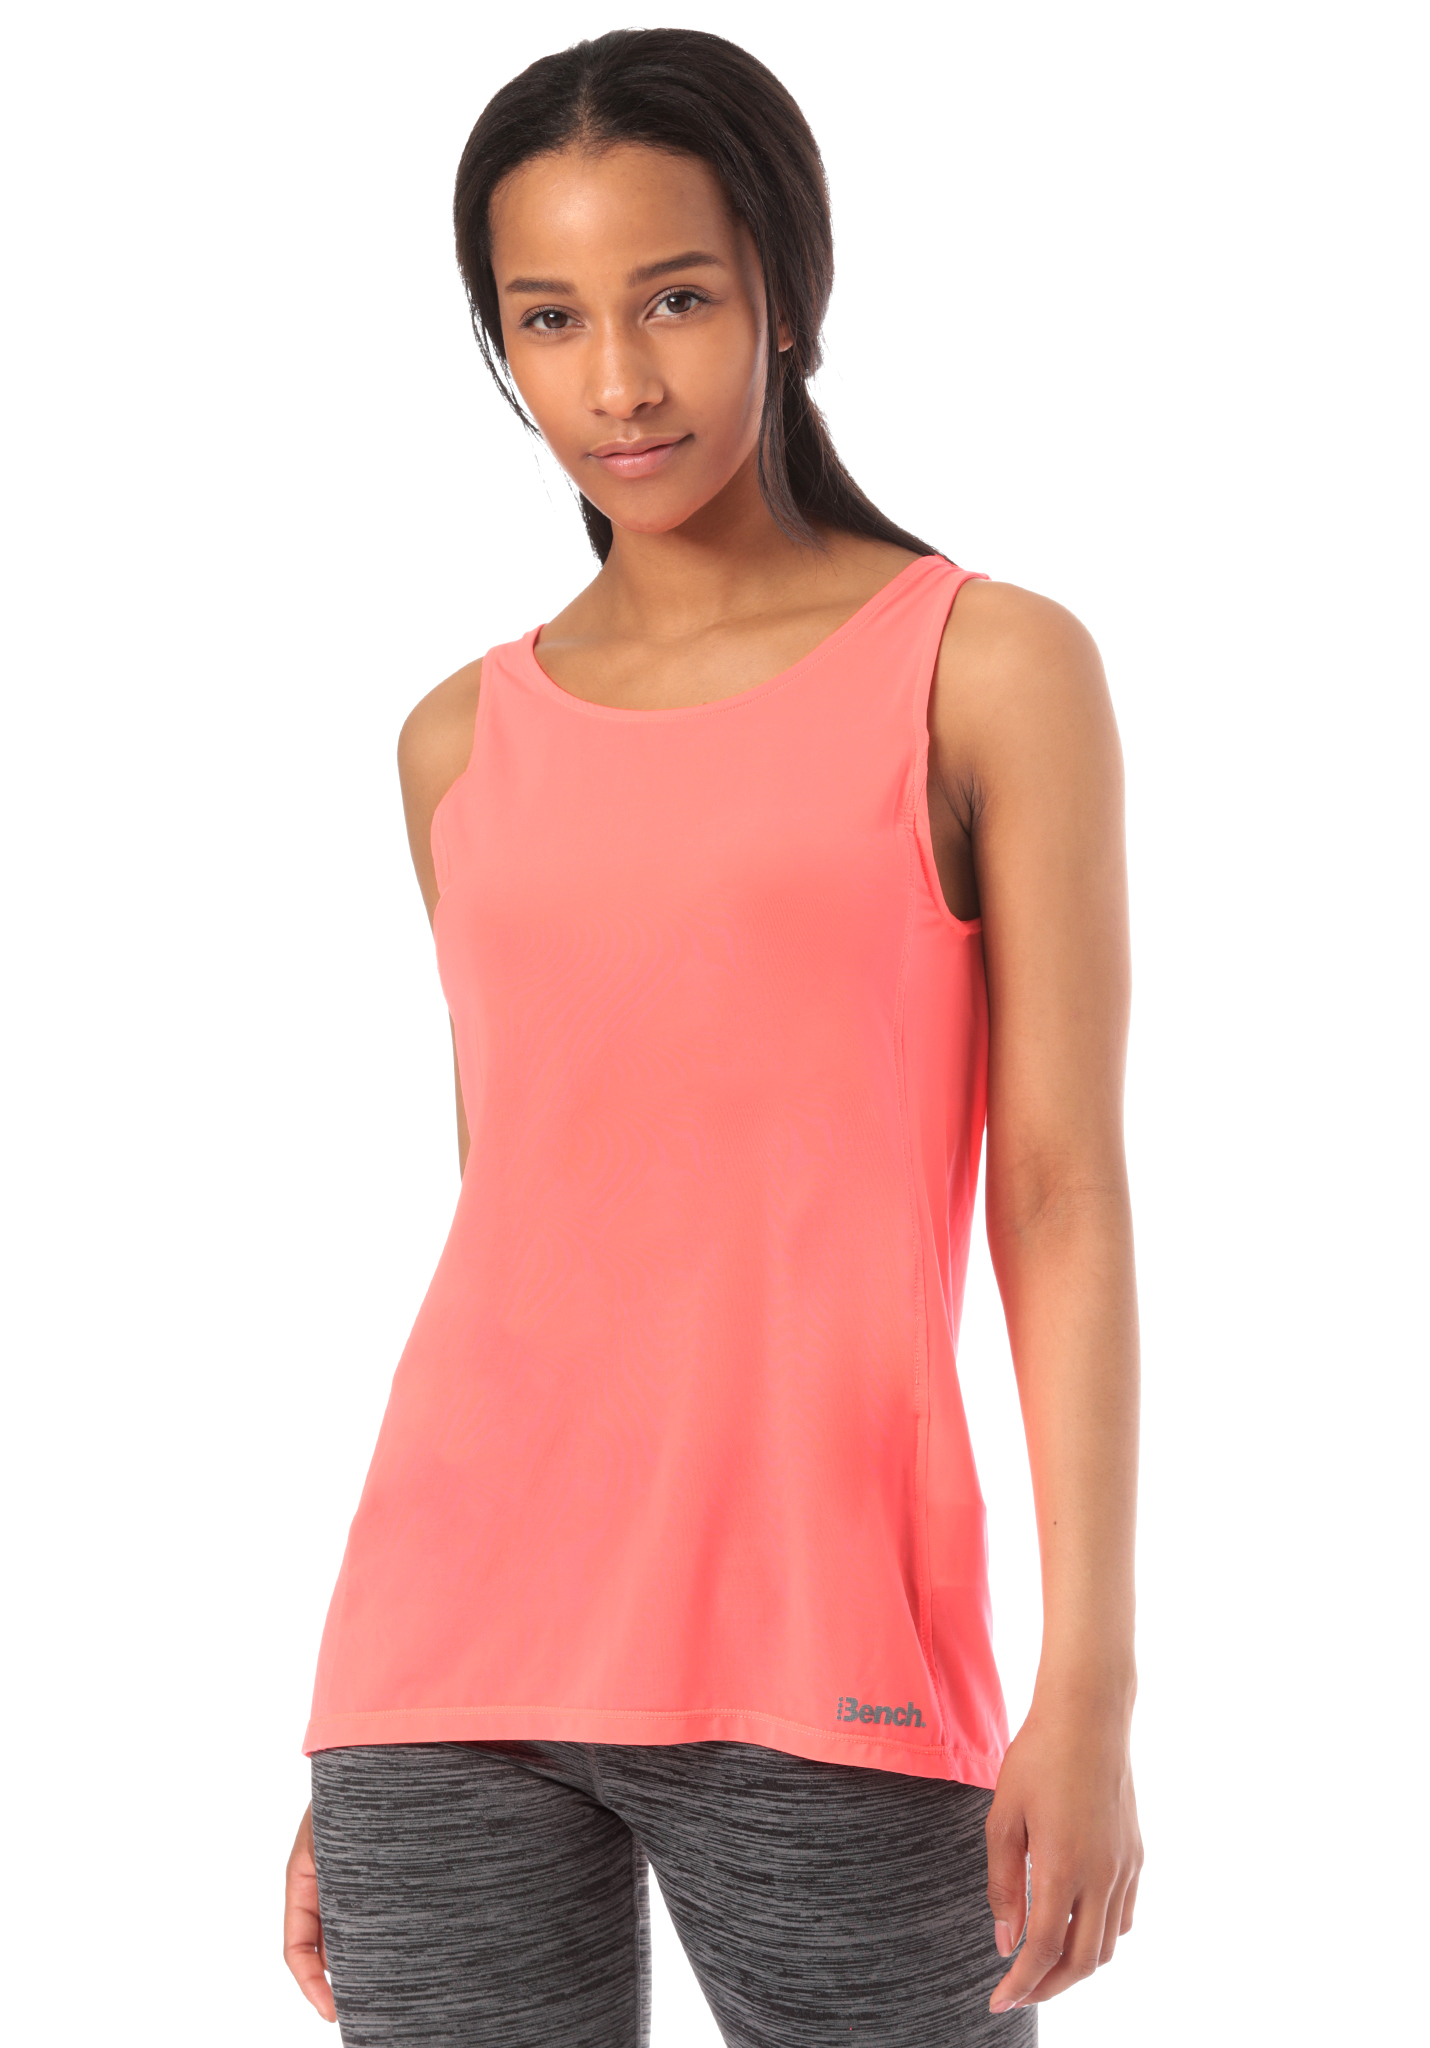 Bench Cut Out Back Smu Colourway Tank Top neonpink als muster XS